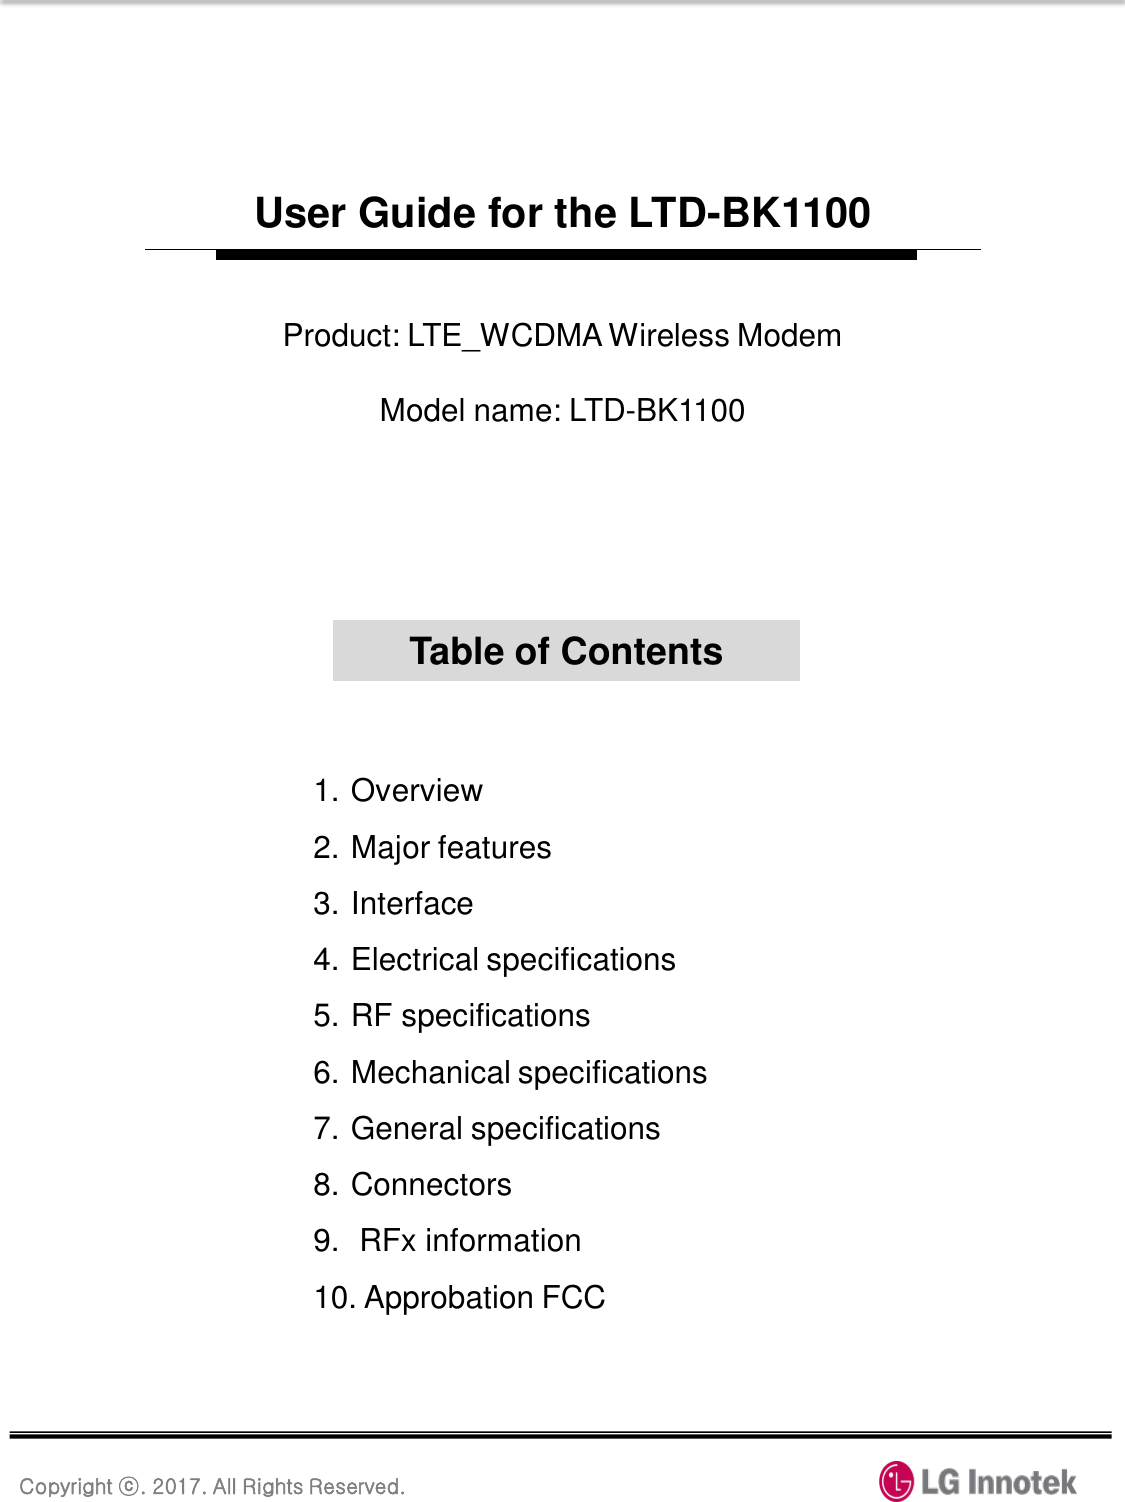 Copyright ⓒ. 2017. All Rights Reserved. User Guide for the LTD-BK1100 1. Overview 2. Major features 3. Interface 4. Electrical specifications 5. RF specifications 6. Mechanical specifications 7. General specifications 8. Connectors 9.  RFx information 10. Approbation FCC Table of Contents Product: LTE_WCDMA Wireless Modem  Model name: LTD-BK1100 